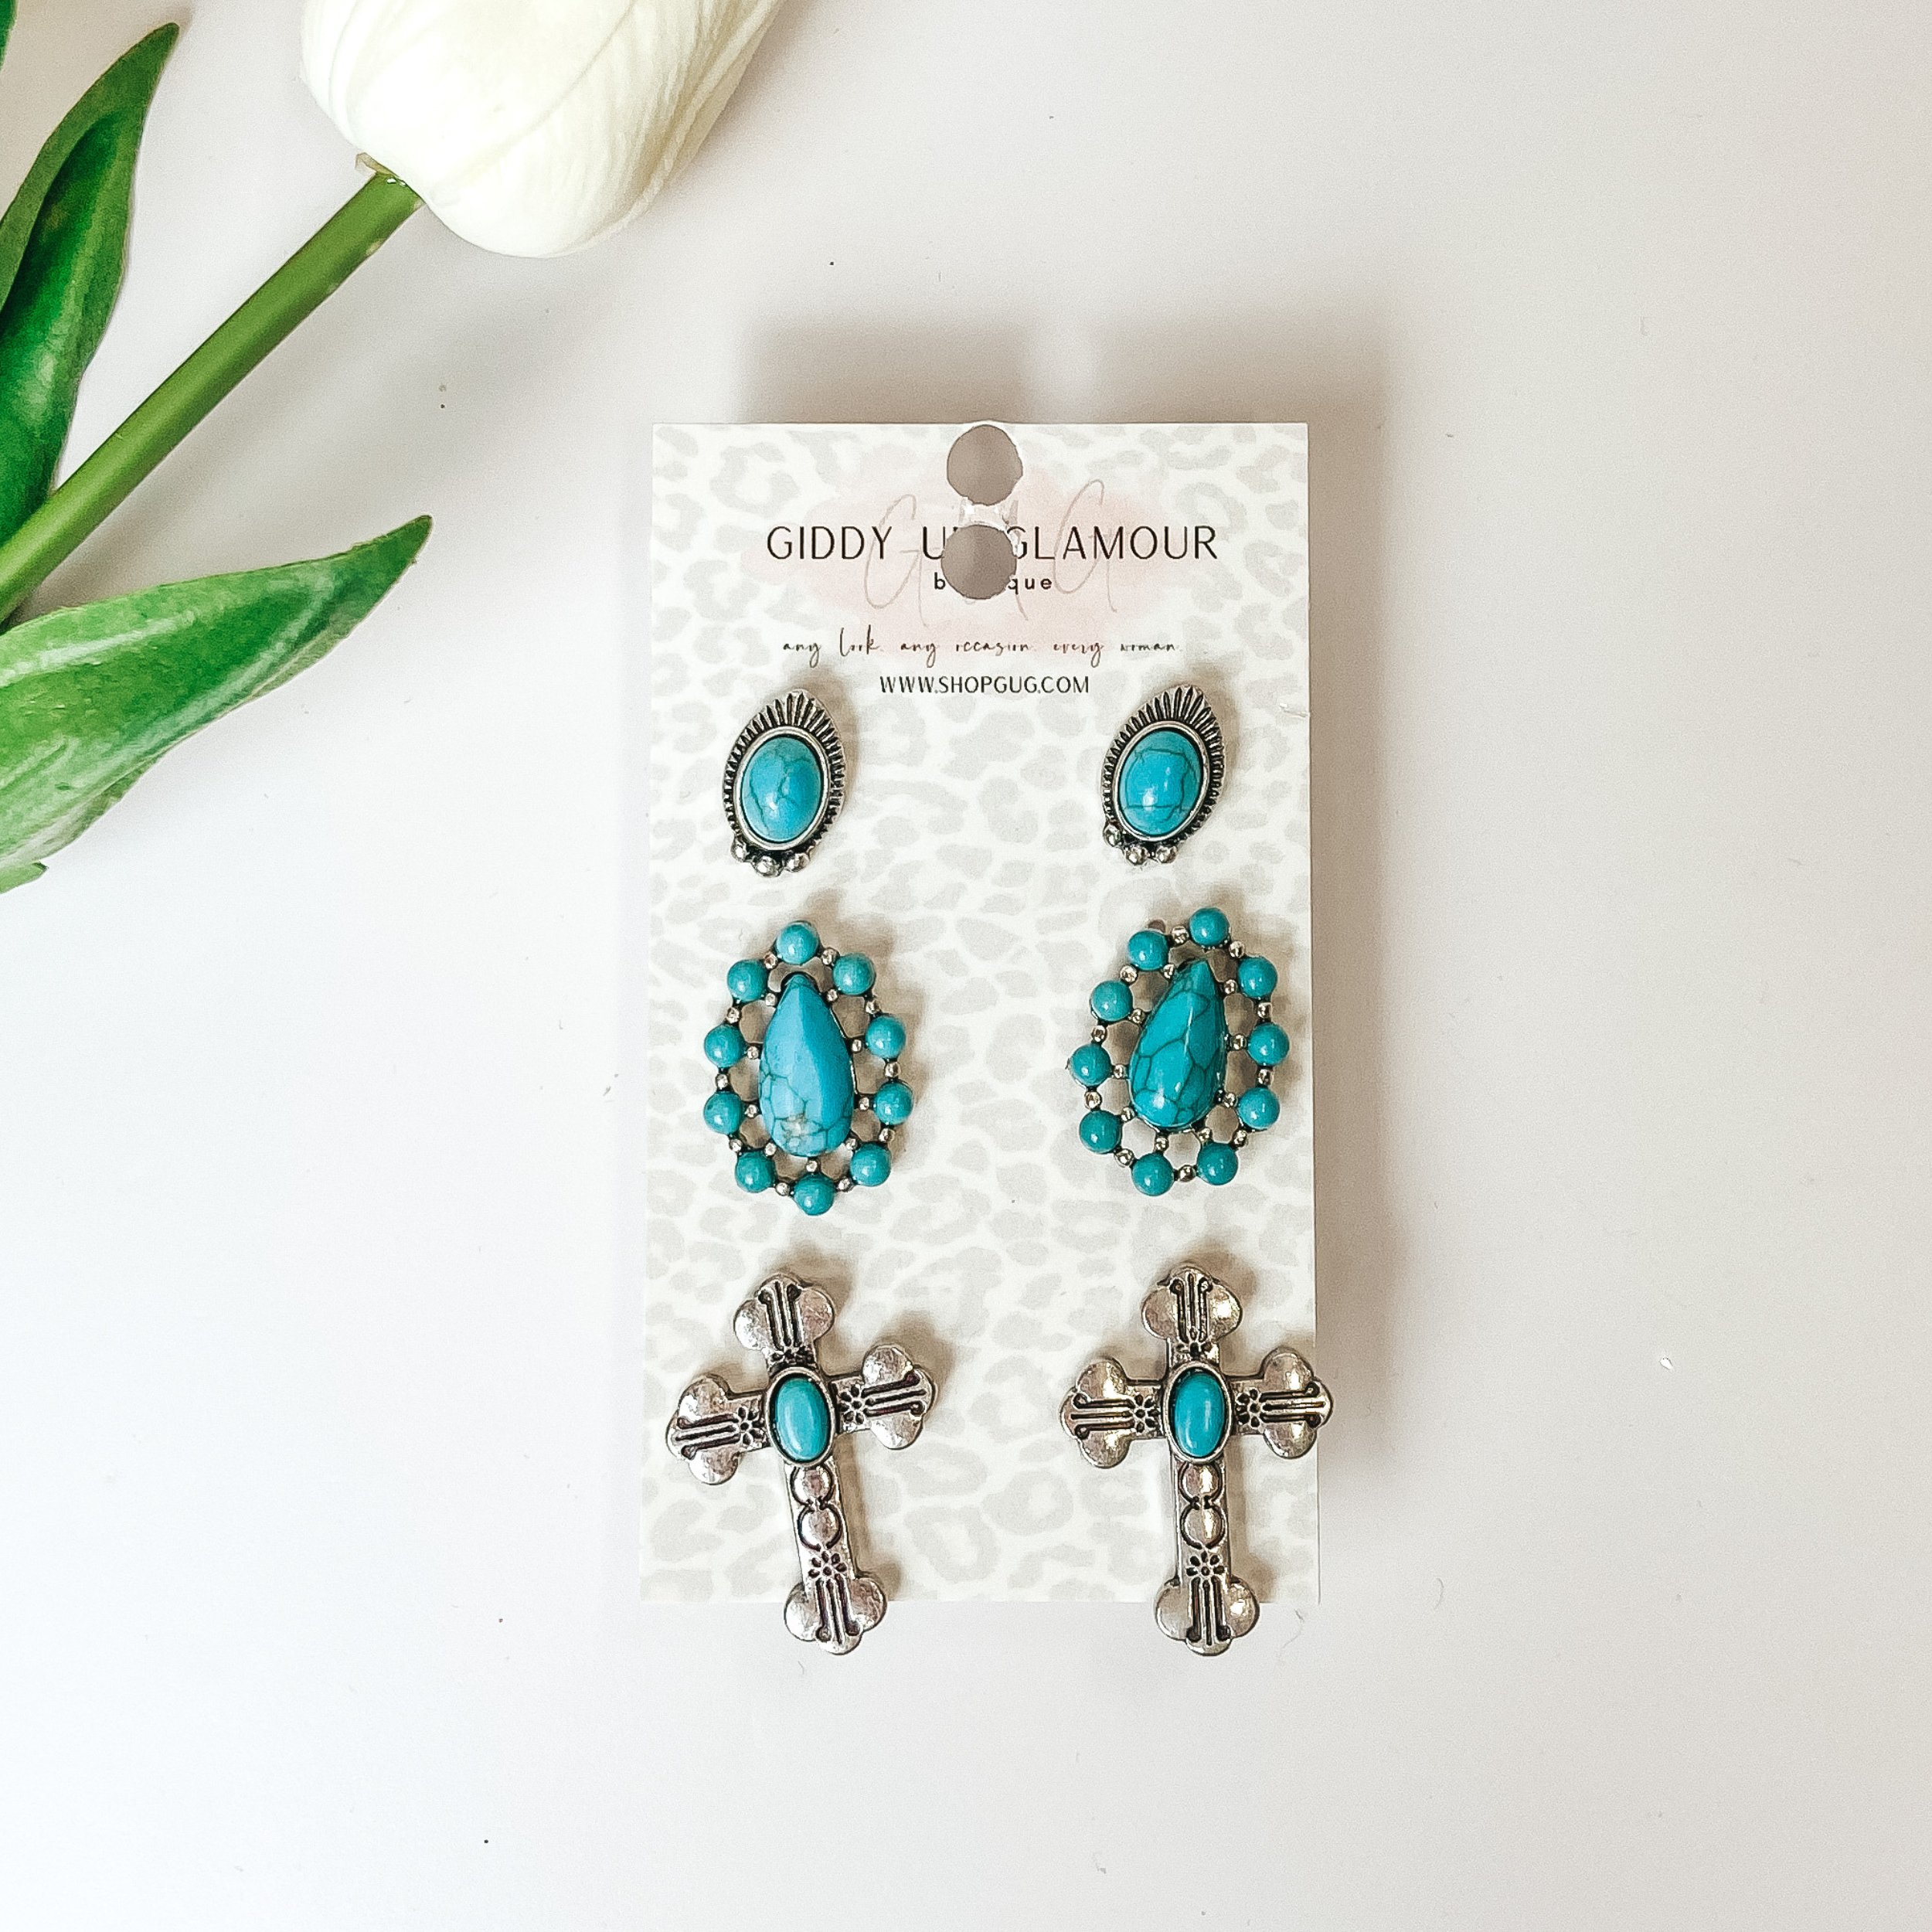 Three multi pack of silver and turquoise stud earrings. On a white background with a flower in the top left